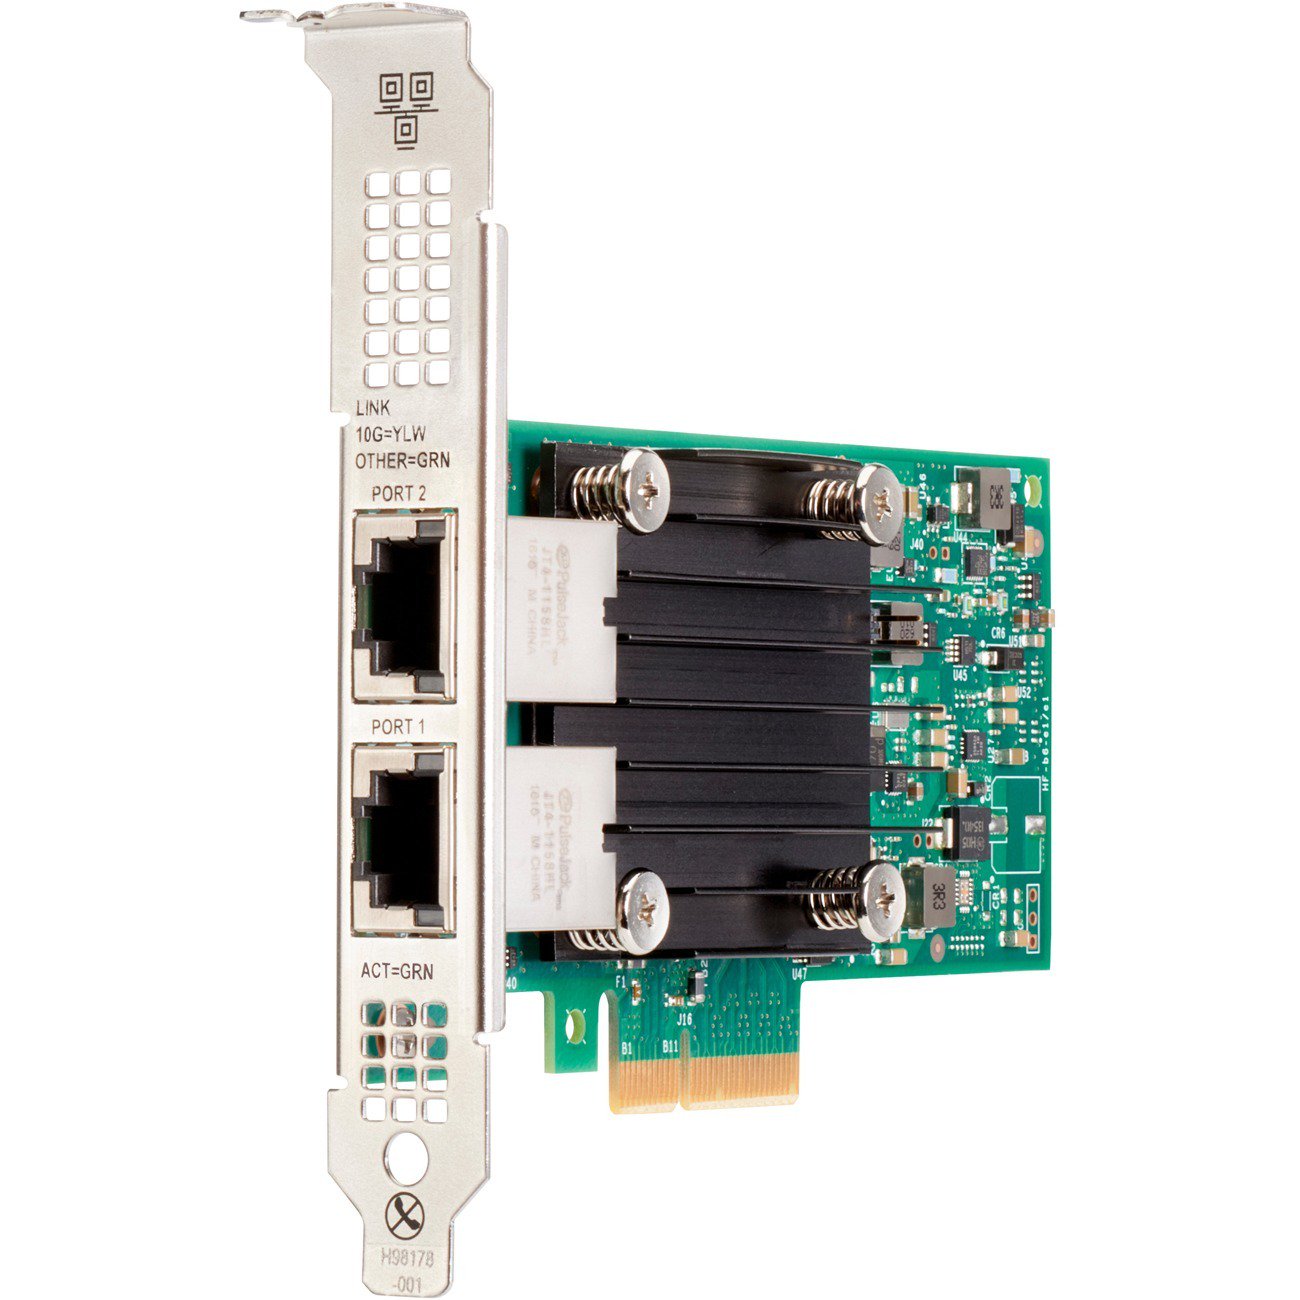 HPE 562T Dual Port 10GB Ethernet Adapter - 817738-B21 Reconditioned